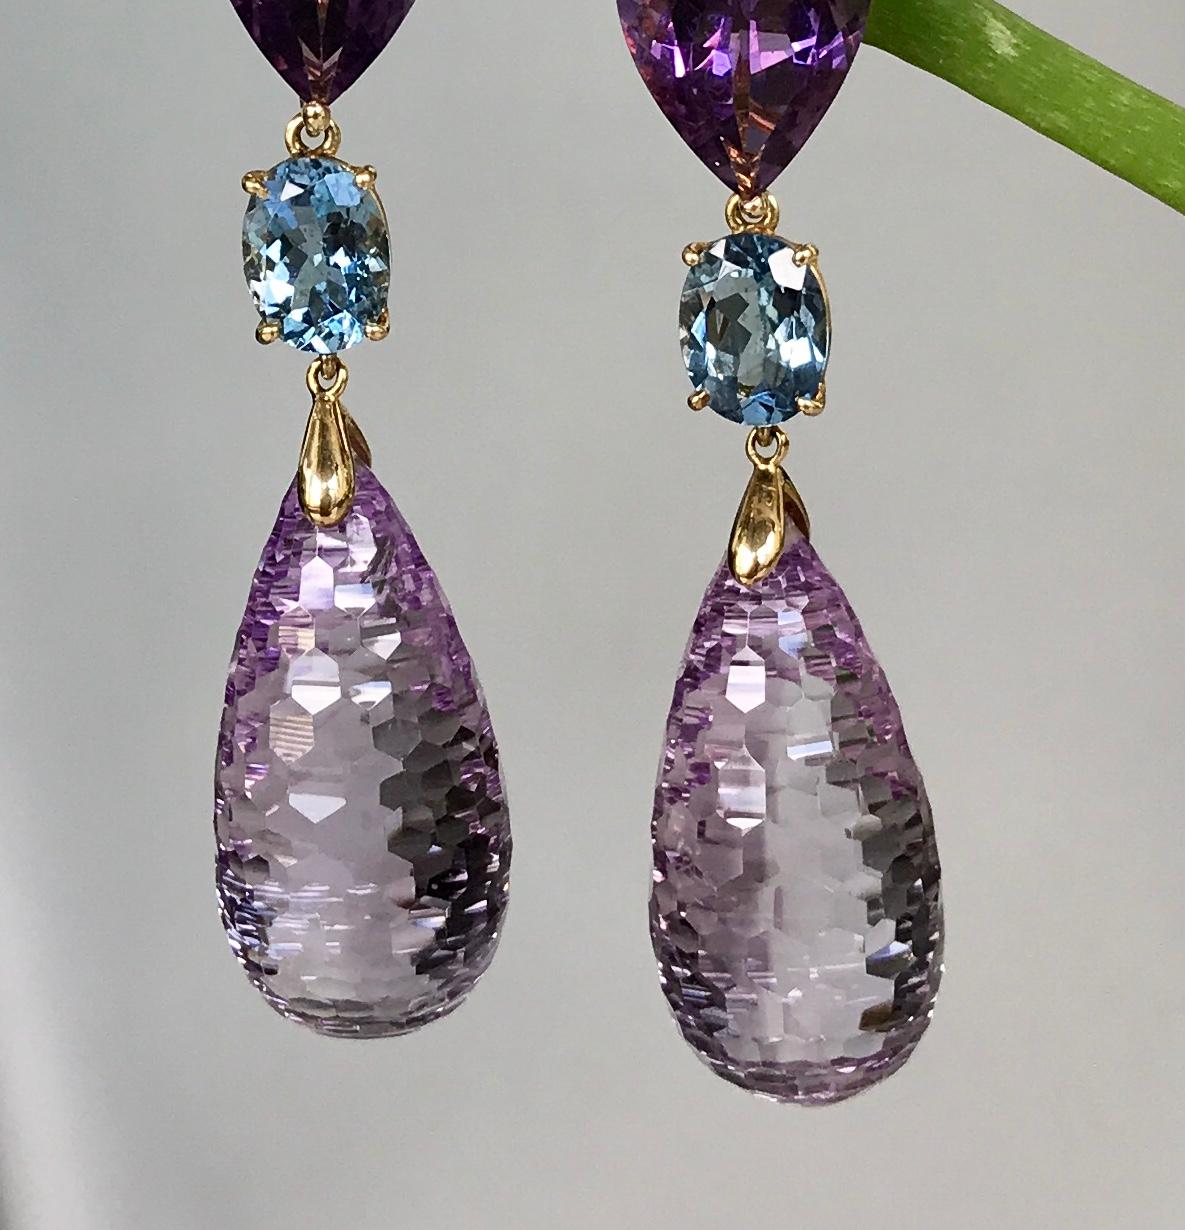 Joon Han one-of-a-kind simply elegant earrings of faceted amethysts, top quality aquamarines, and beautiful fancy-cut amethyst briolettes. The exquisite briolettes glitter and shimmer as they reflect the light. These timeless earrings are